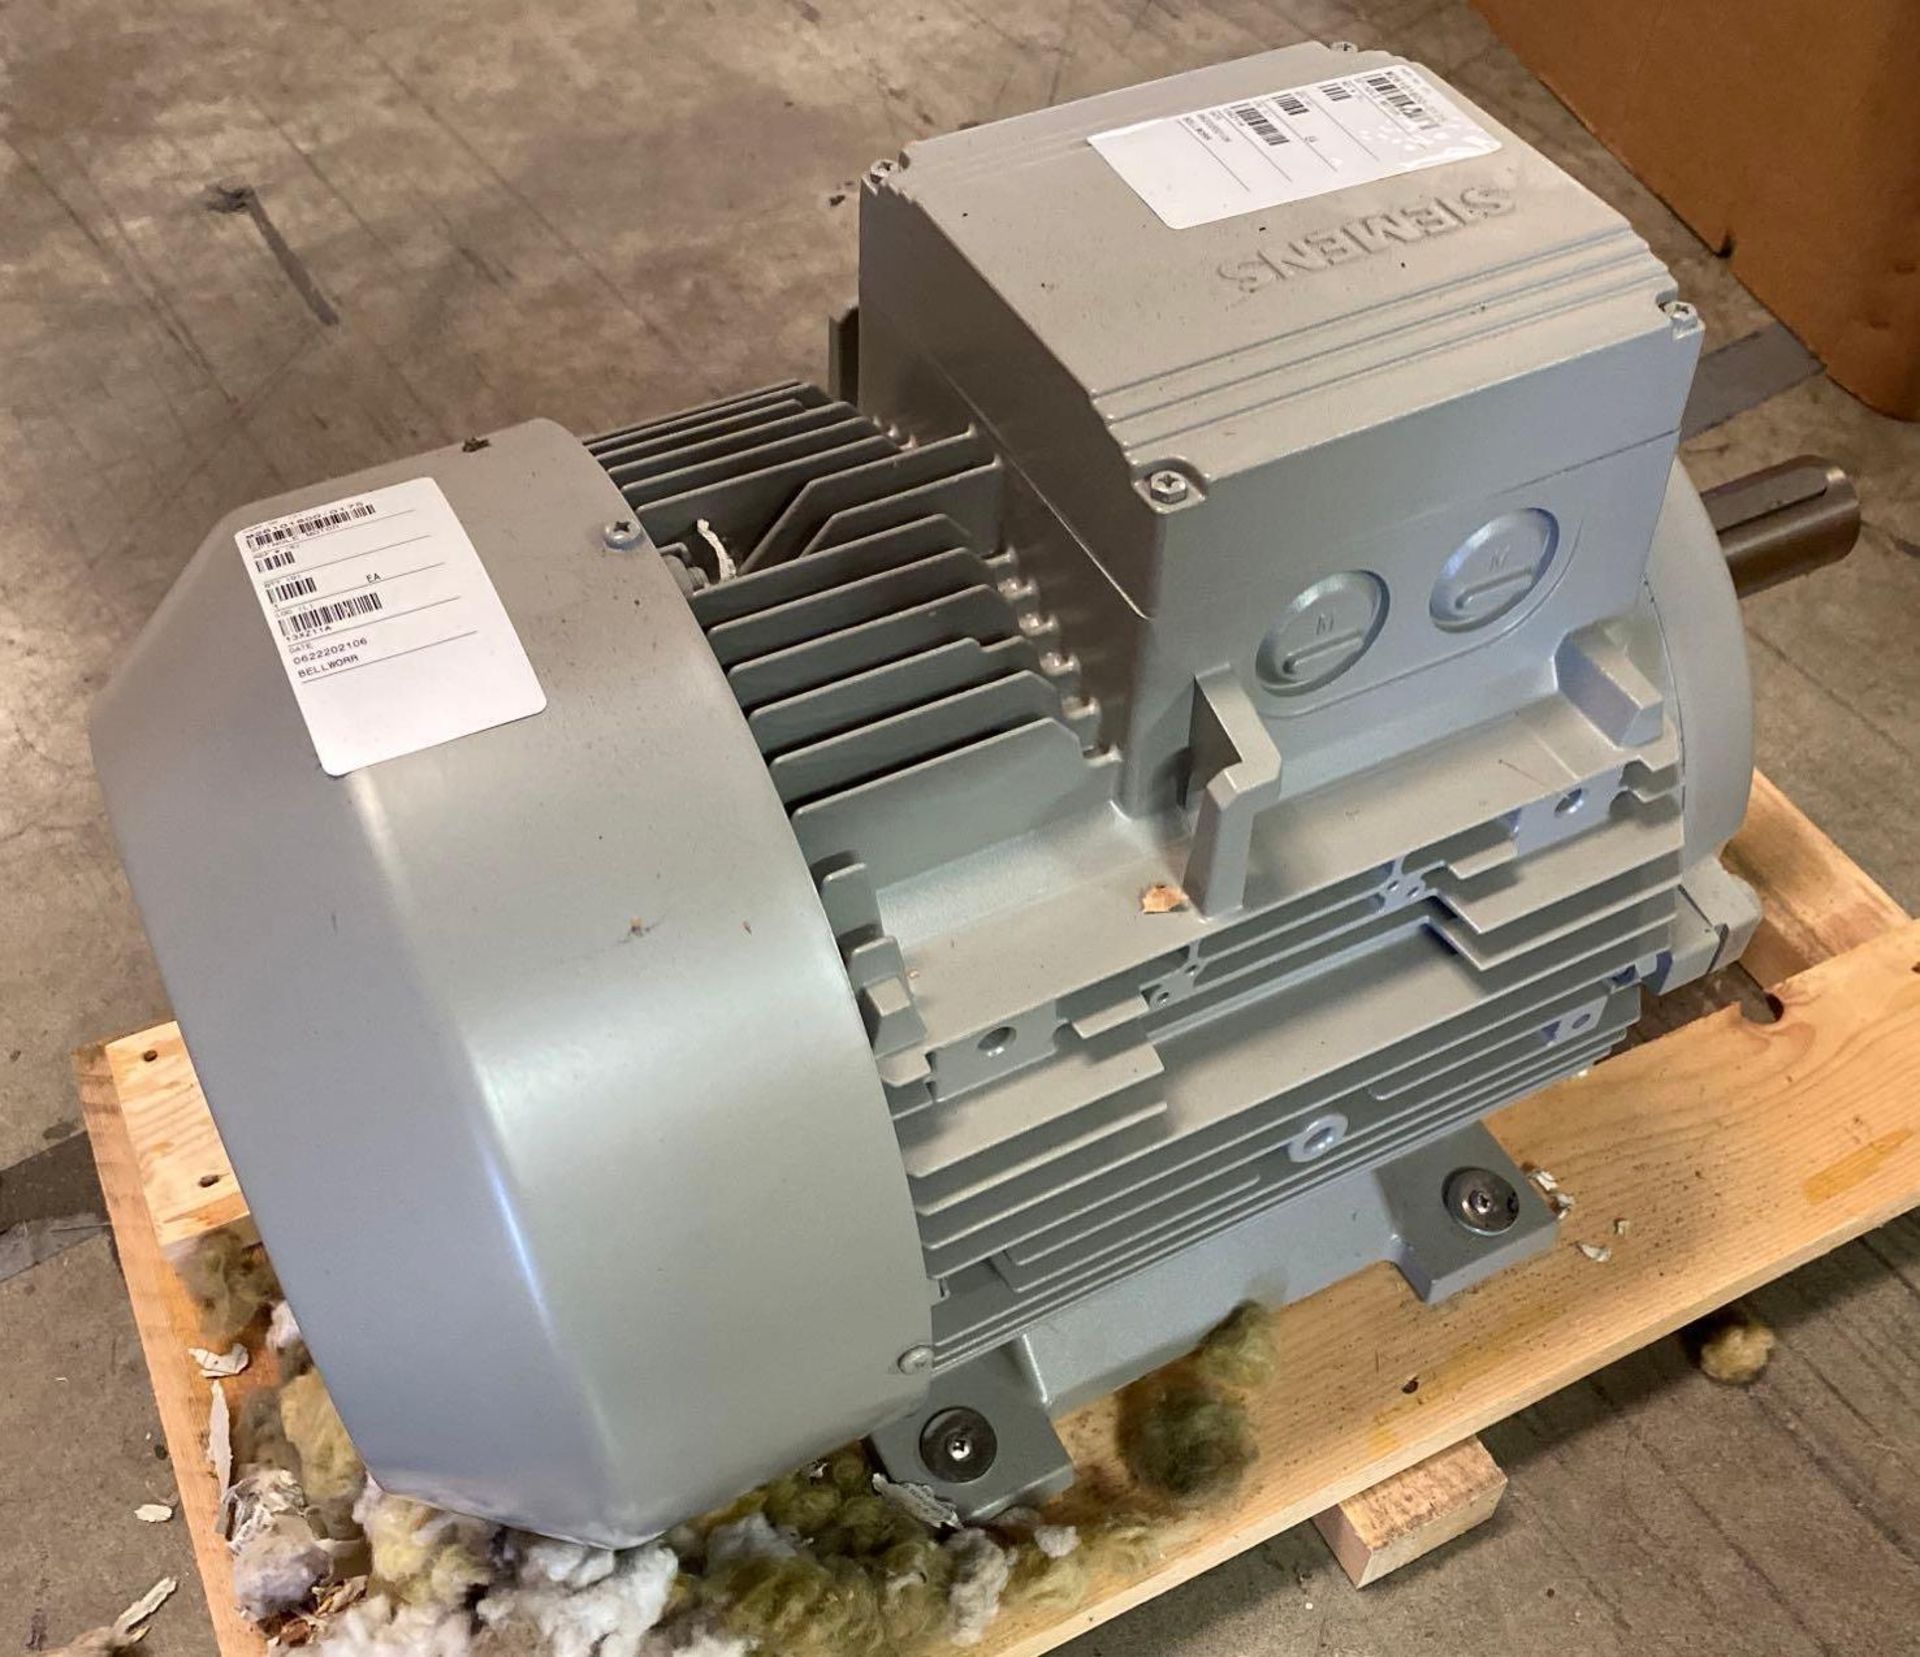 NEW IN BOX Siemens Spindle Motor - Image 4 of 5